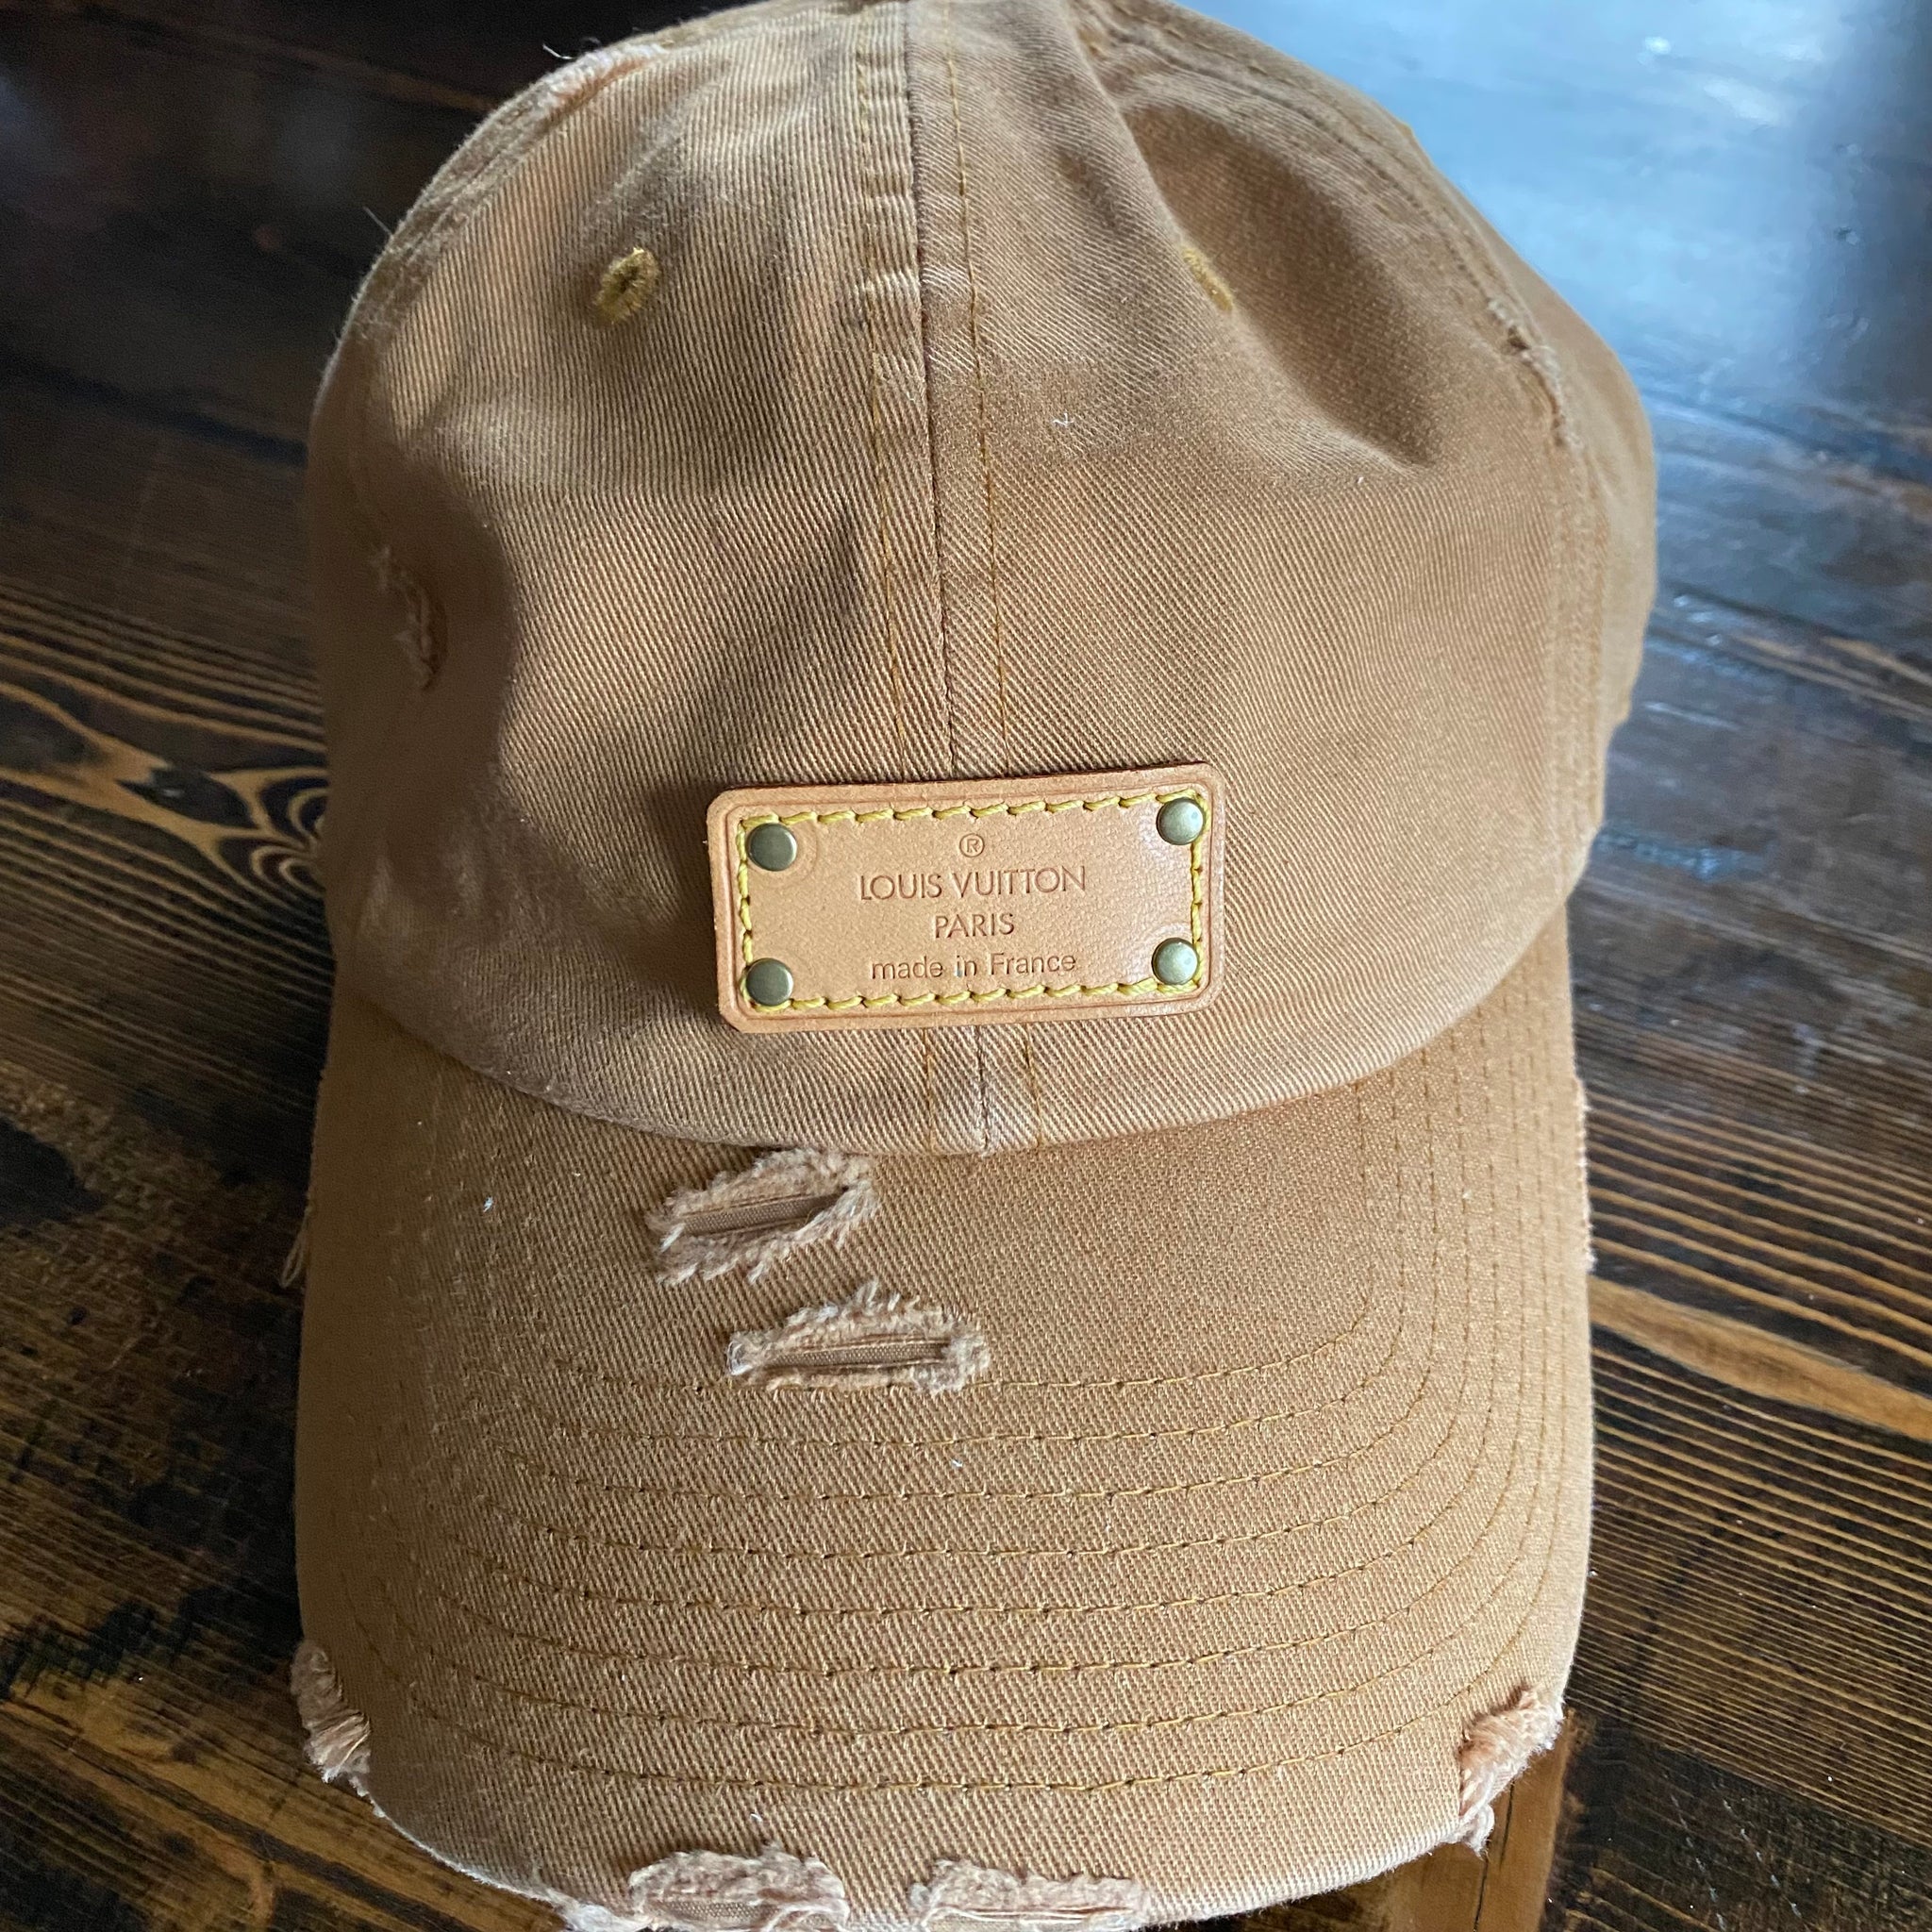 Cognac Colored Distressed Hat with LV Leather Patch – Beauty Bird Vintage